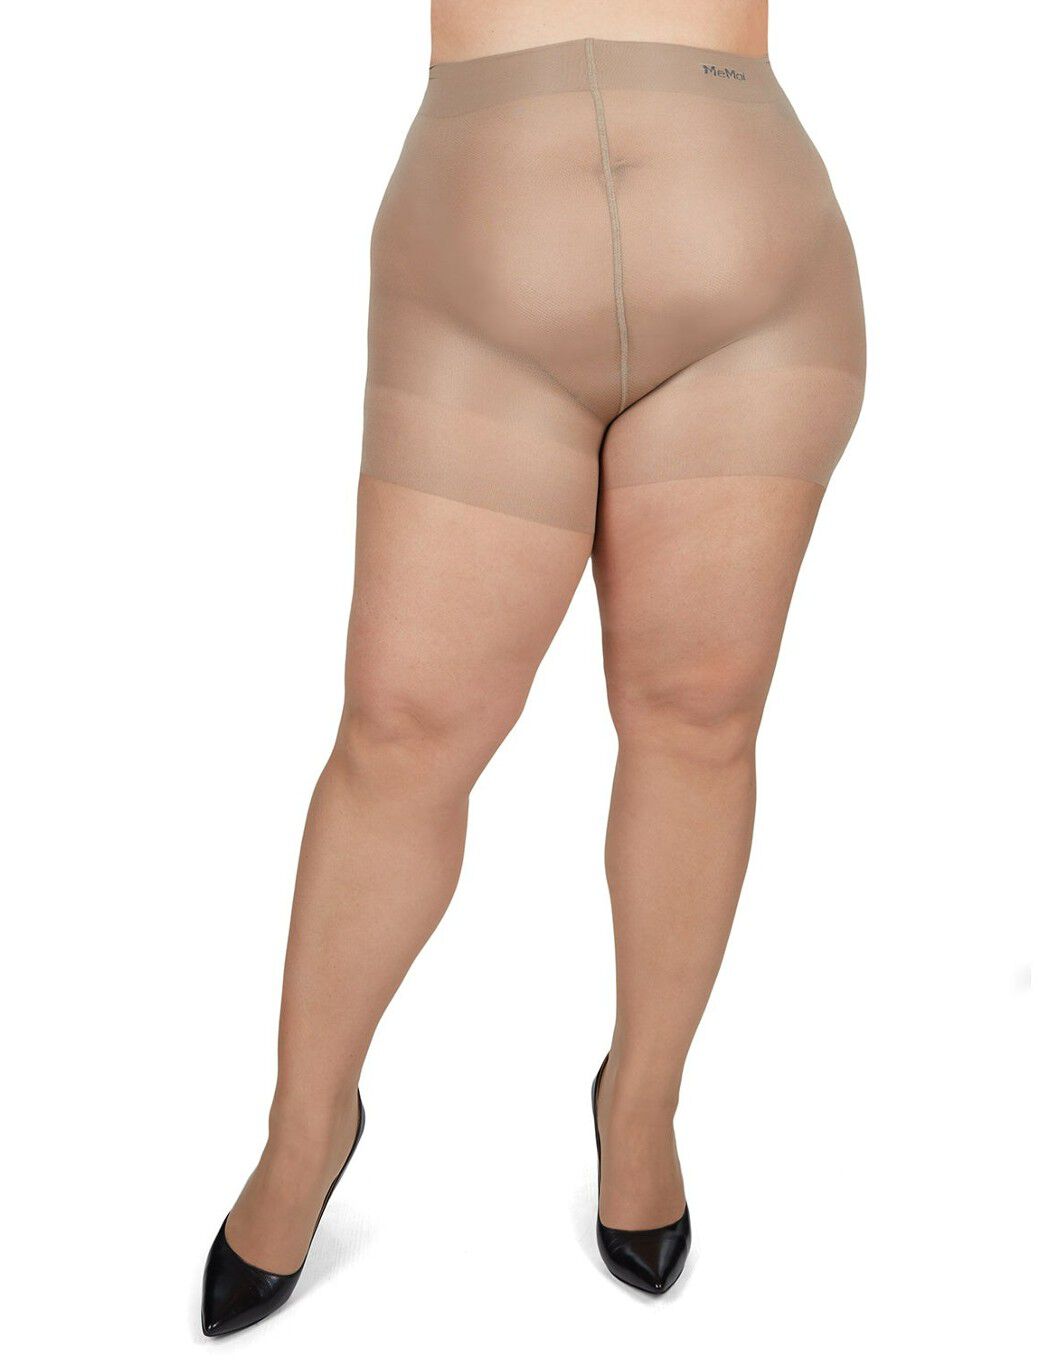 Plus Size Women Memoi Energizing Light Support Control Top Pantyhose By ( Size 22/24 )